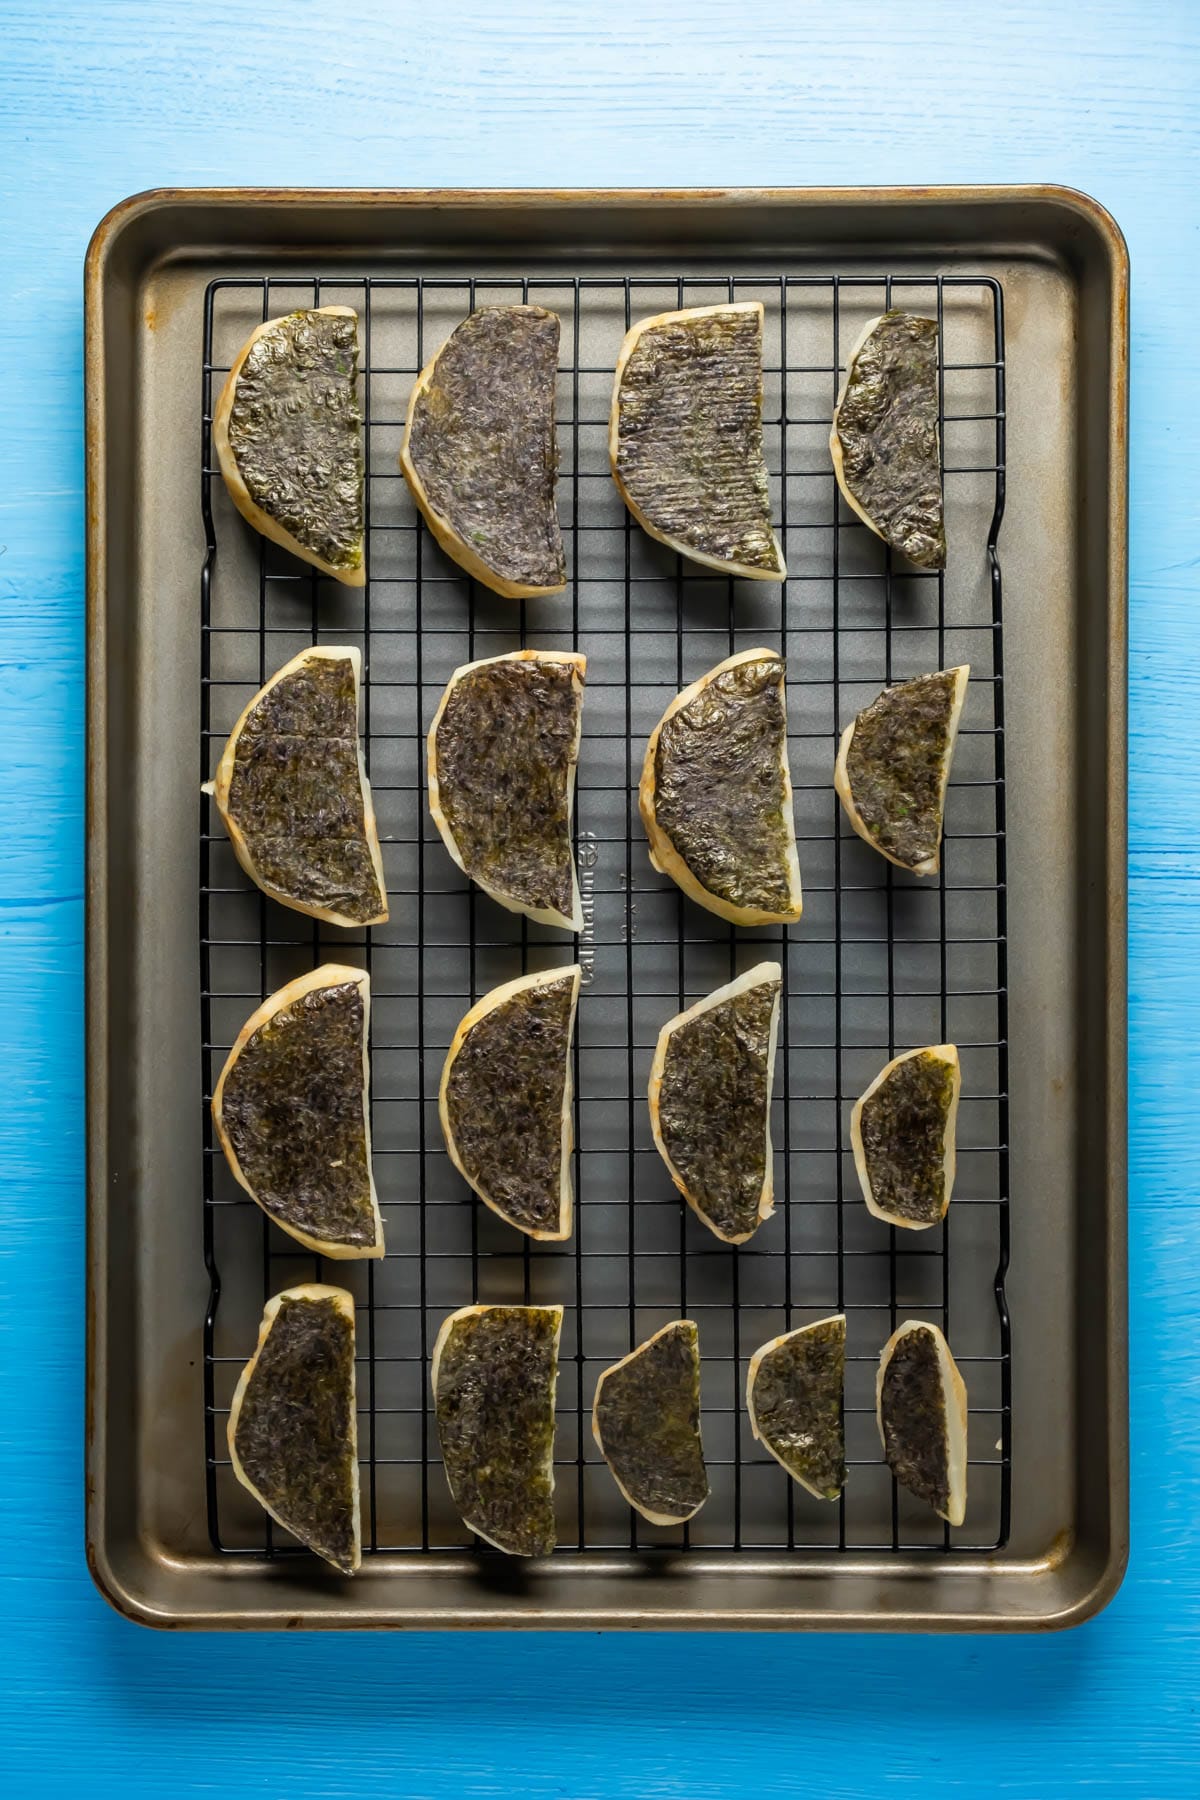 Celeriac pieces topped with nori on a wire rack.